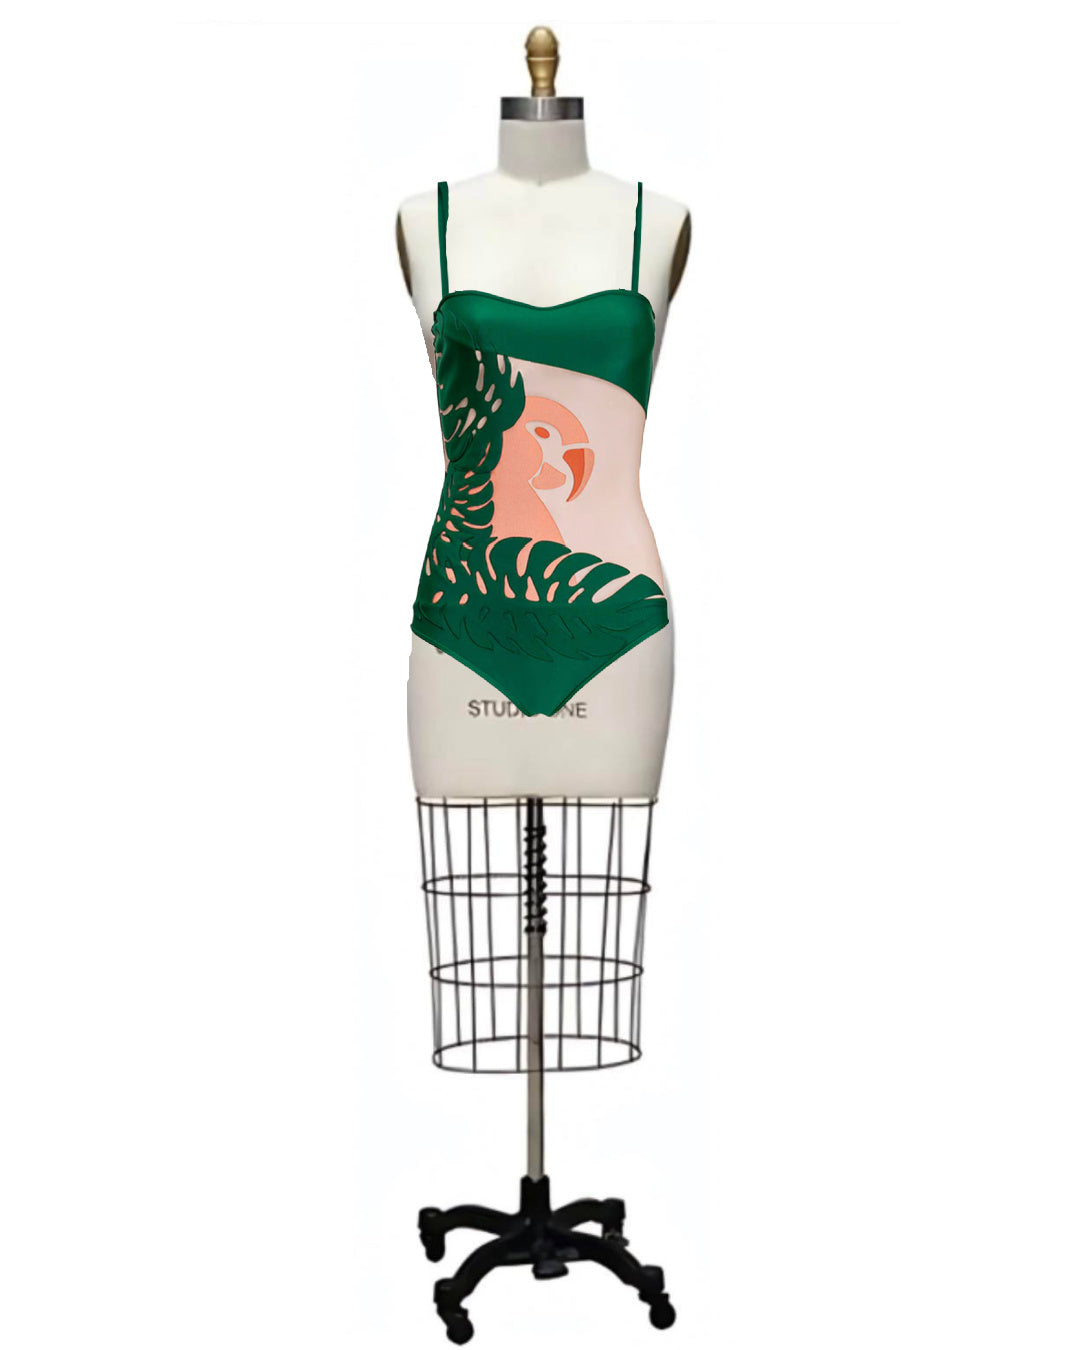 Miami Nice- the 1980s Miami Art Deco Inspired Swimsuit or Sarong with Parrot